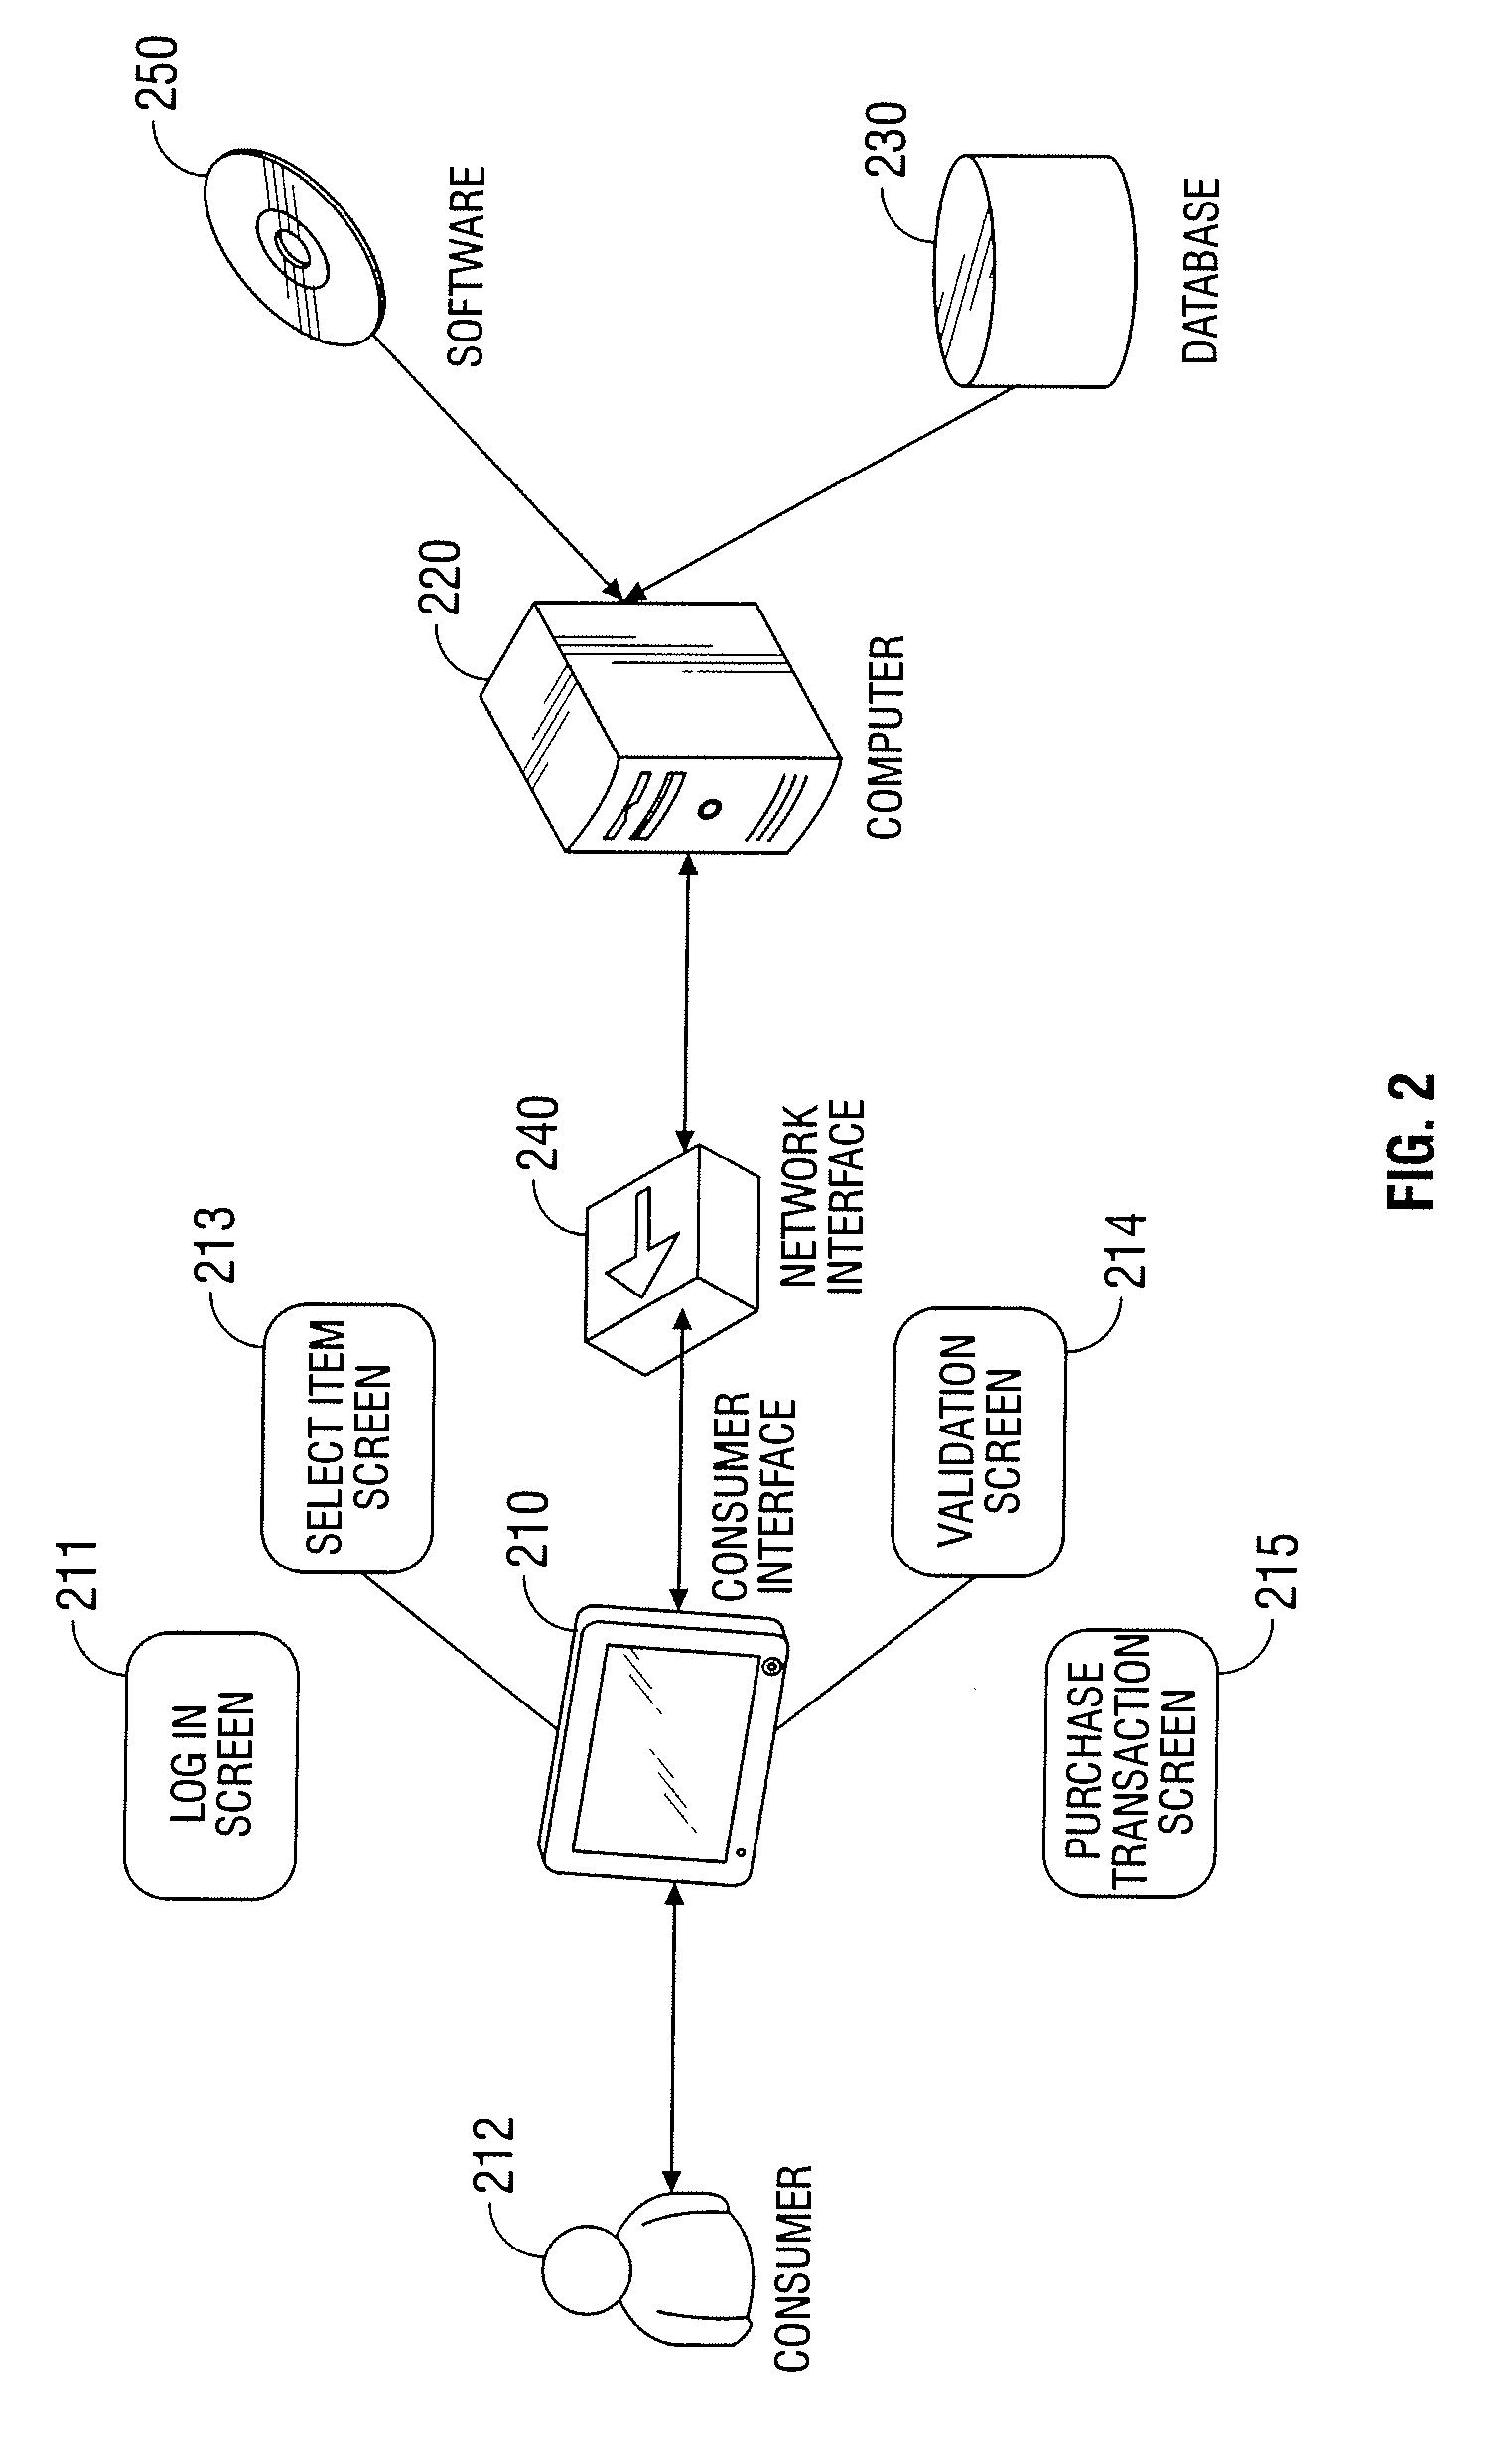 Automated vending of products containing controlled substances